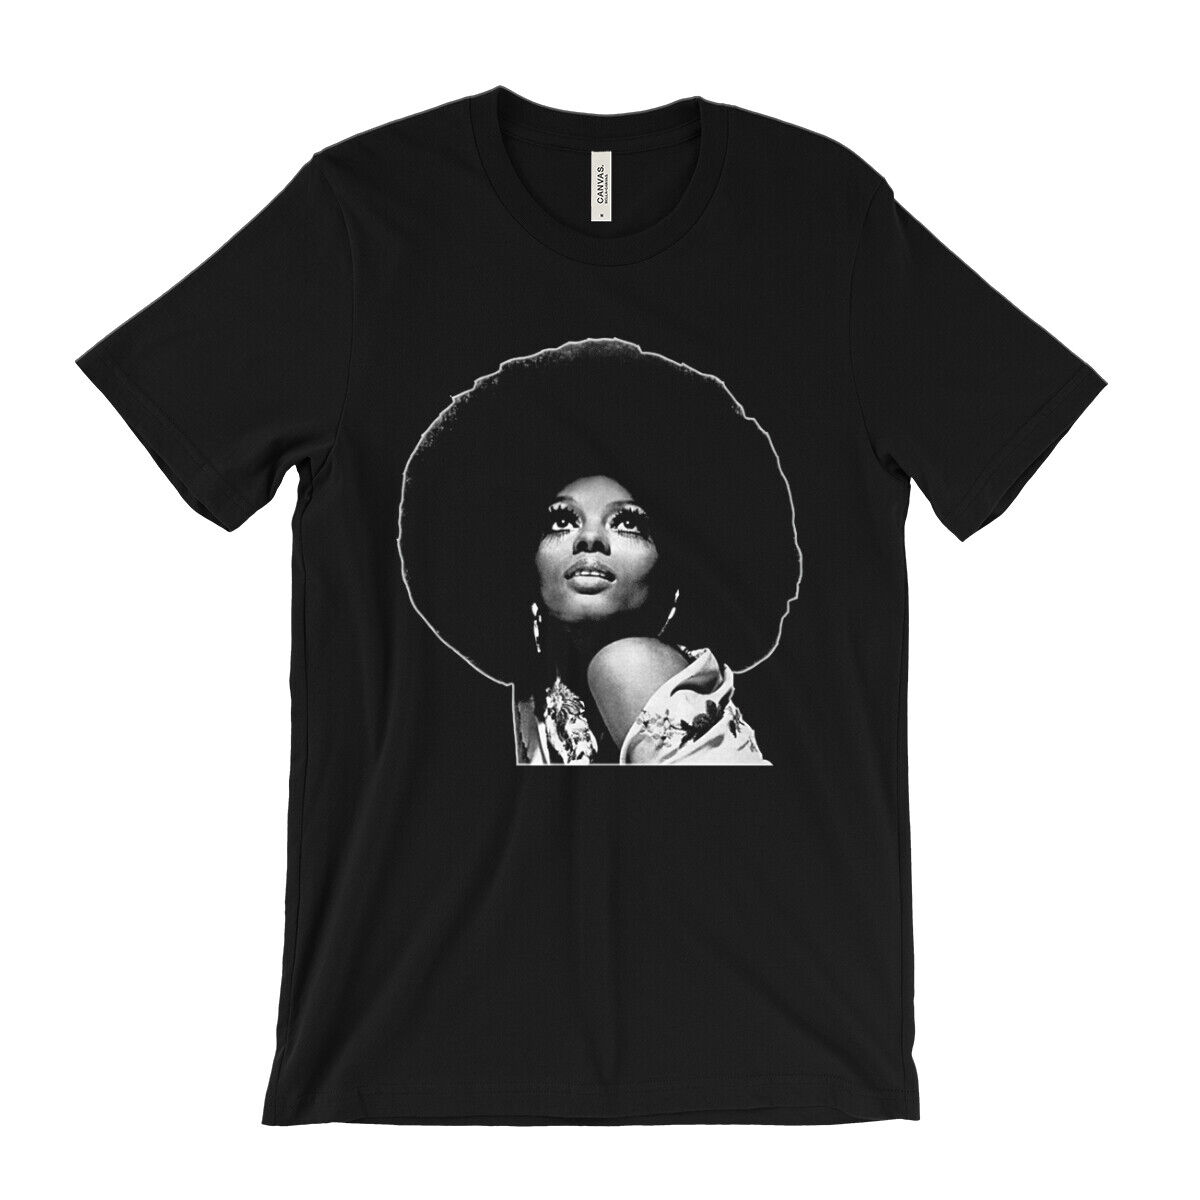 Diana Ross Afro T-Shirt - The Supremes - Soul - Disco - Motown - Love Hangover